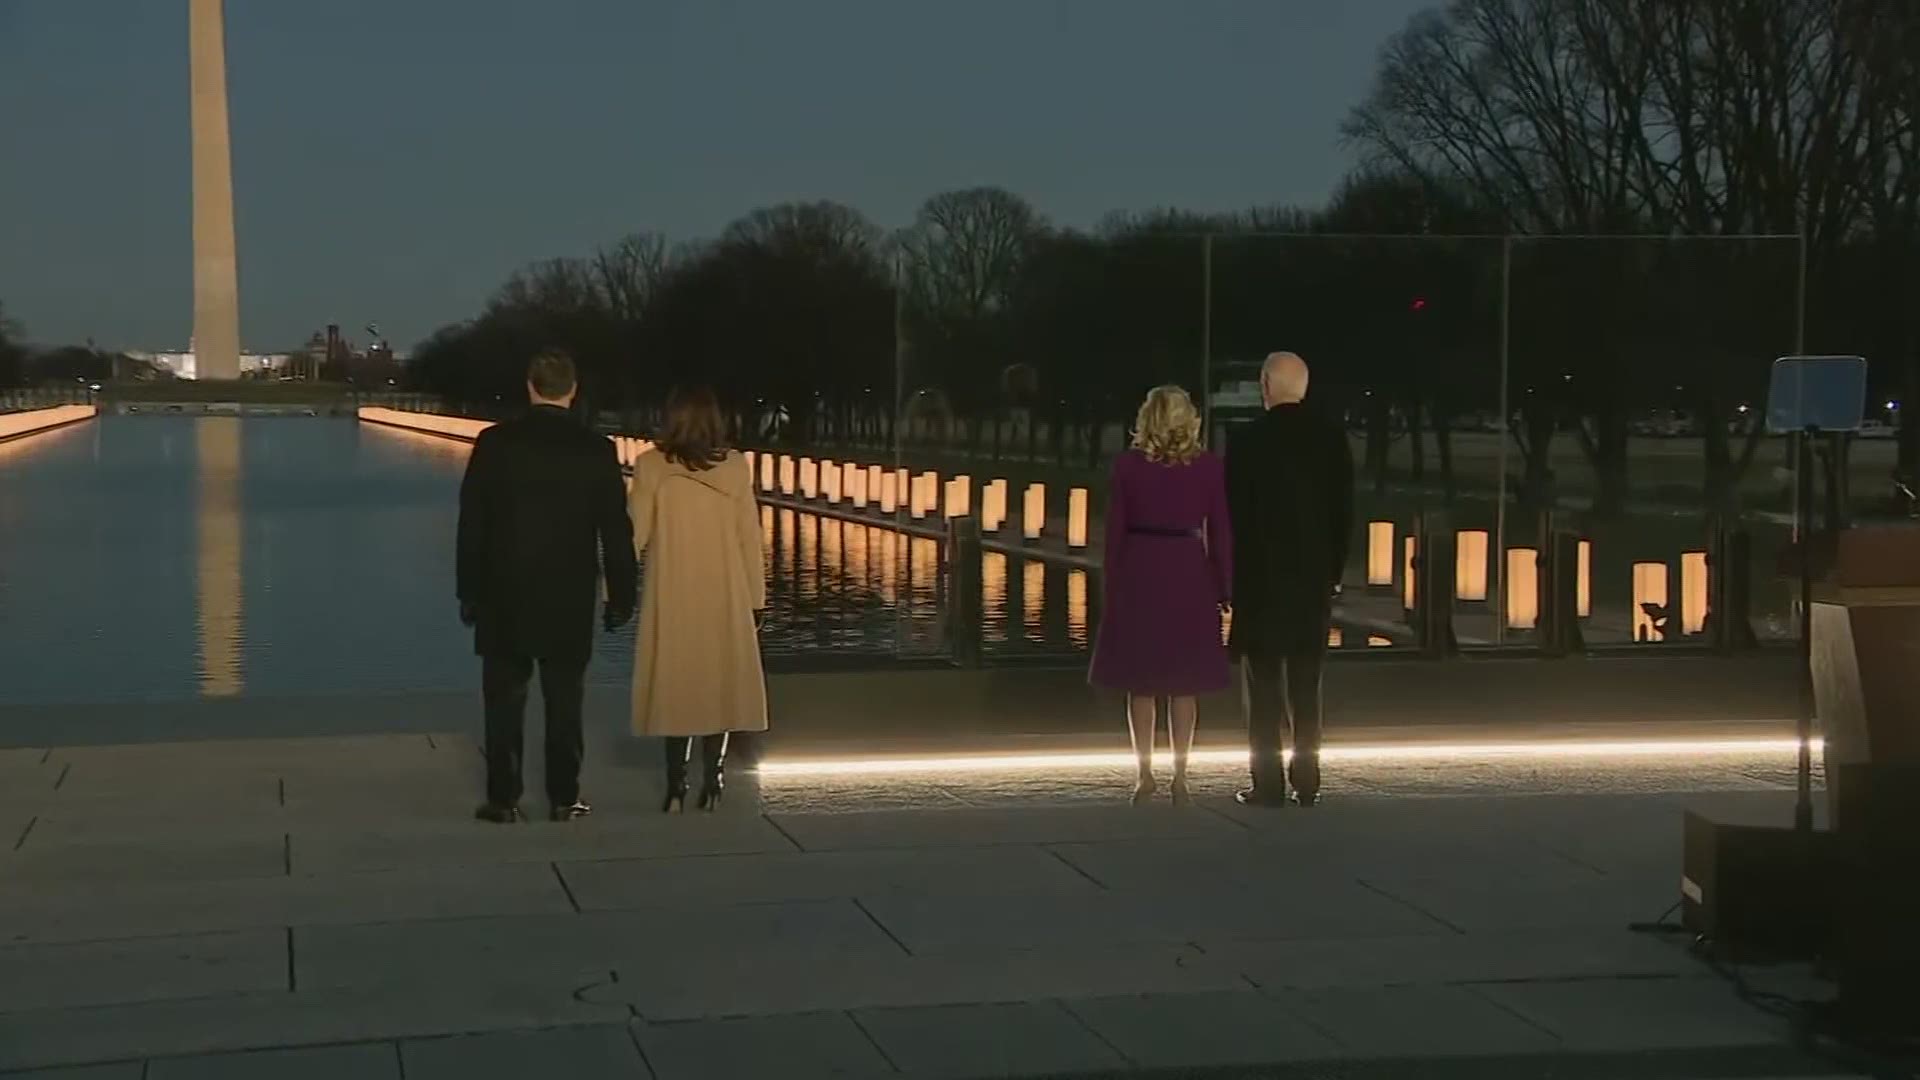 Biden's first event in Washington Tuesday was to take part in an evening ceremony near the Lincoln Memorial to honor the 400,000 American lives lost to COVID-19.